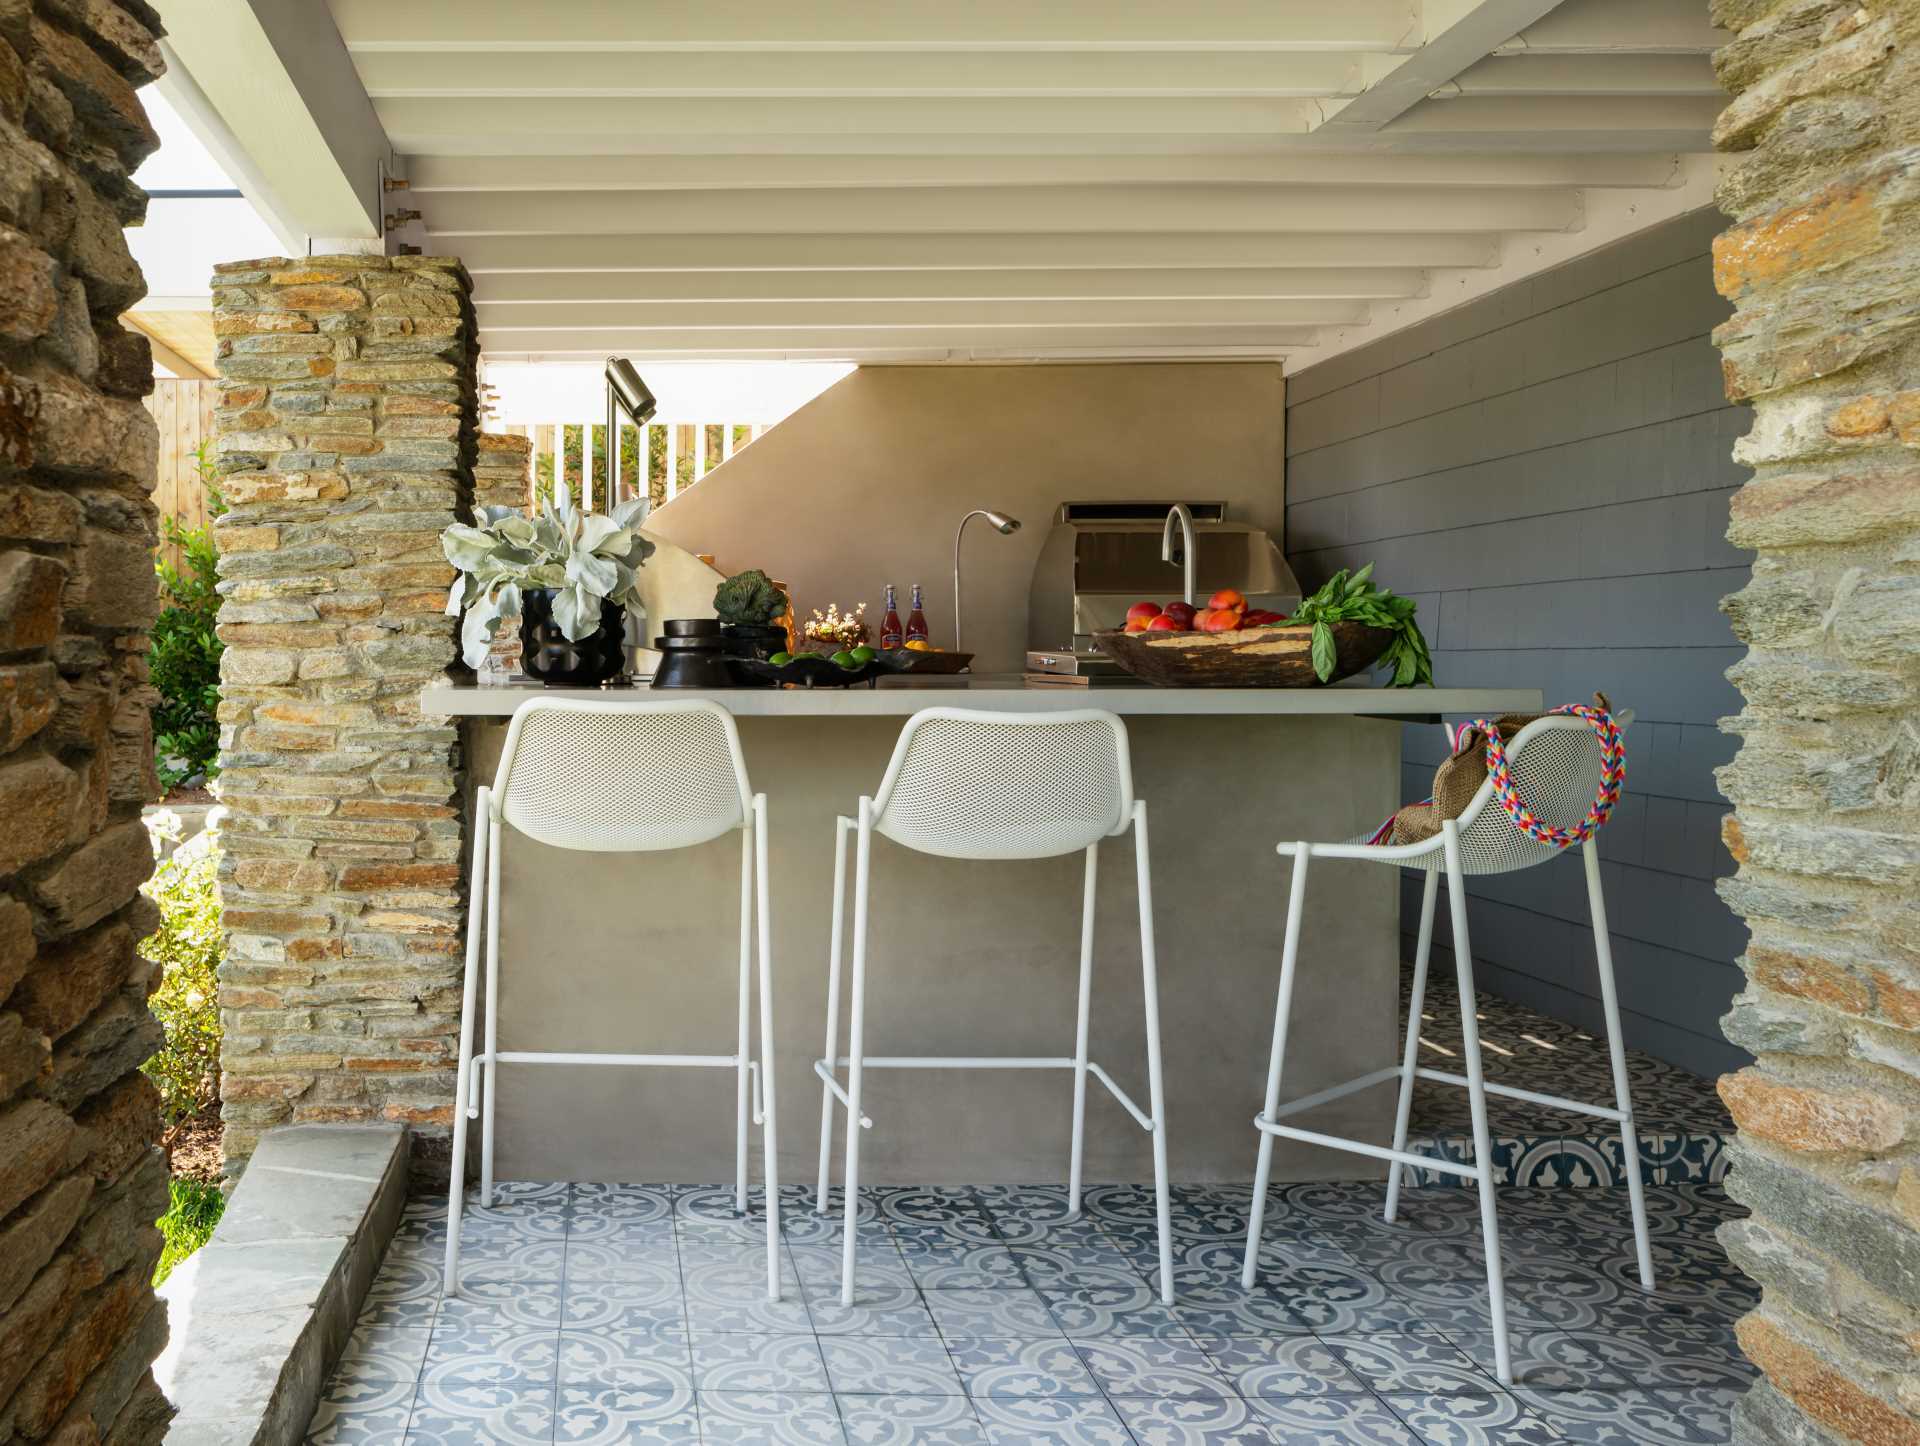 An outdoor kitchen was added underneath an existing deck.